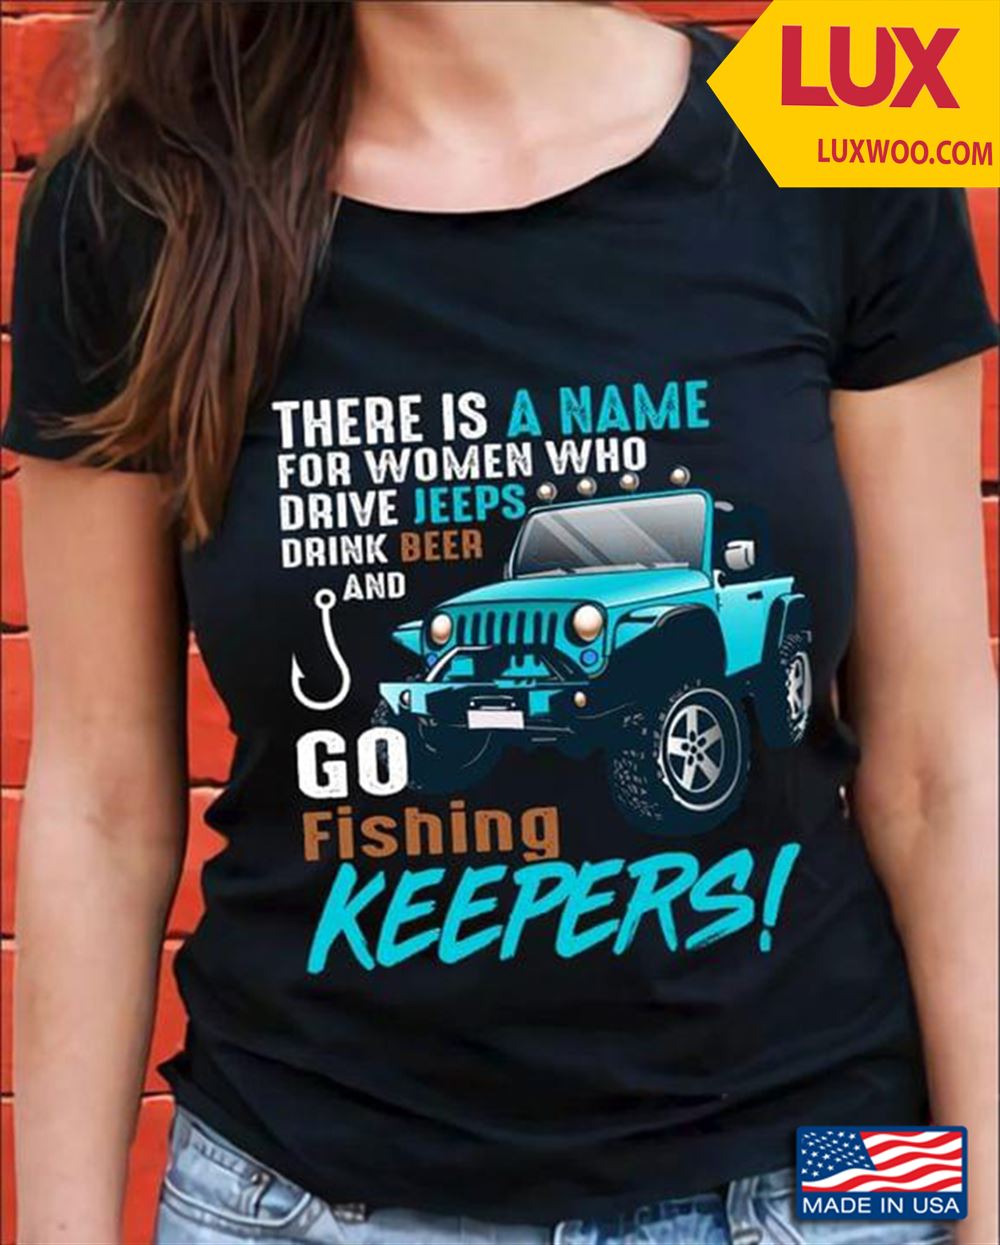 There Is A Name For Women Who Drive Jeeps Drink Beer And Go Fishing Keepers Tshirt Size Up To 5xl